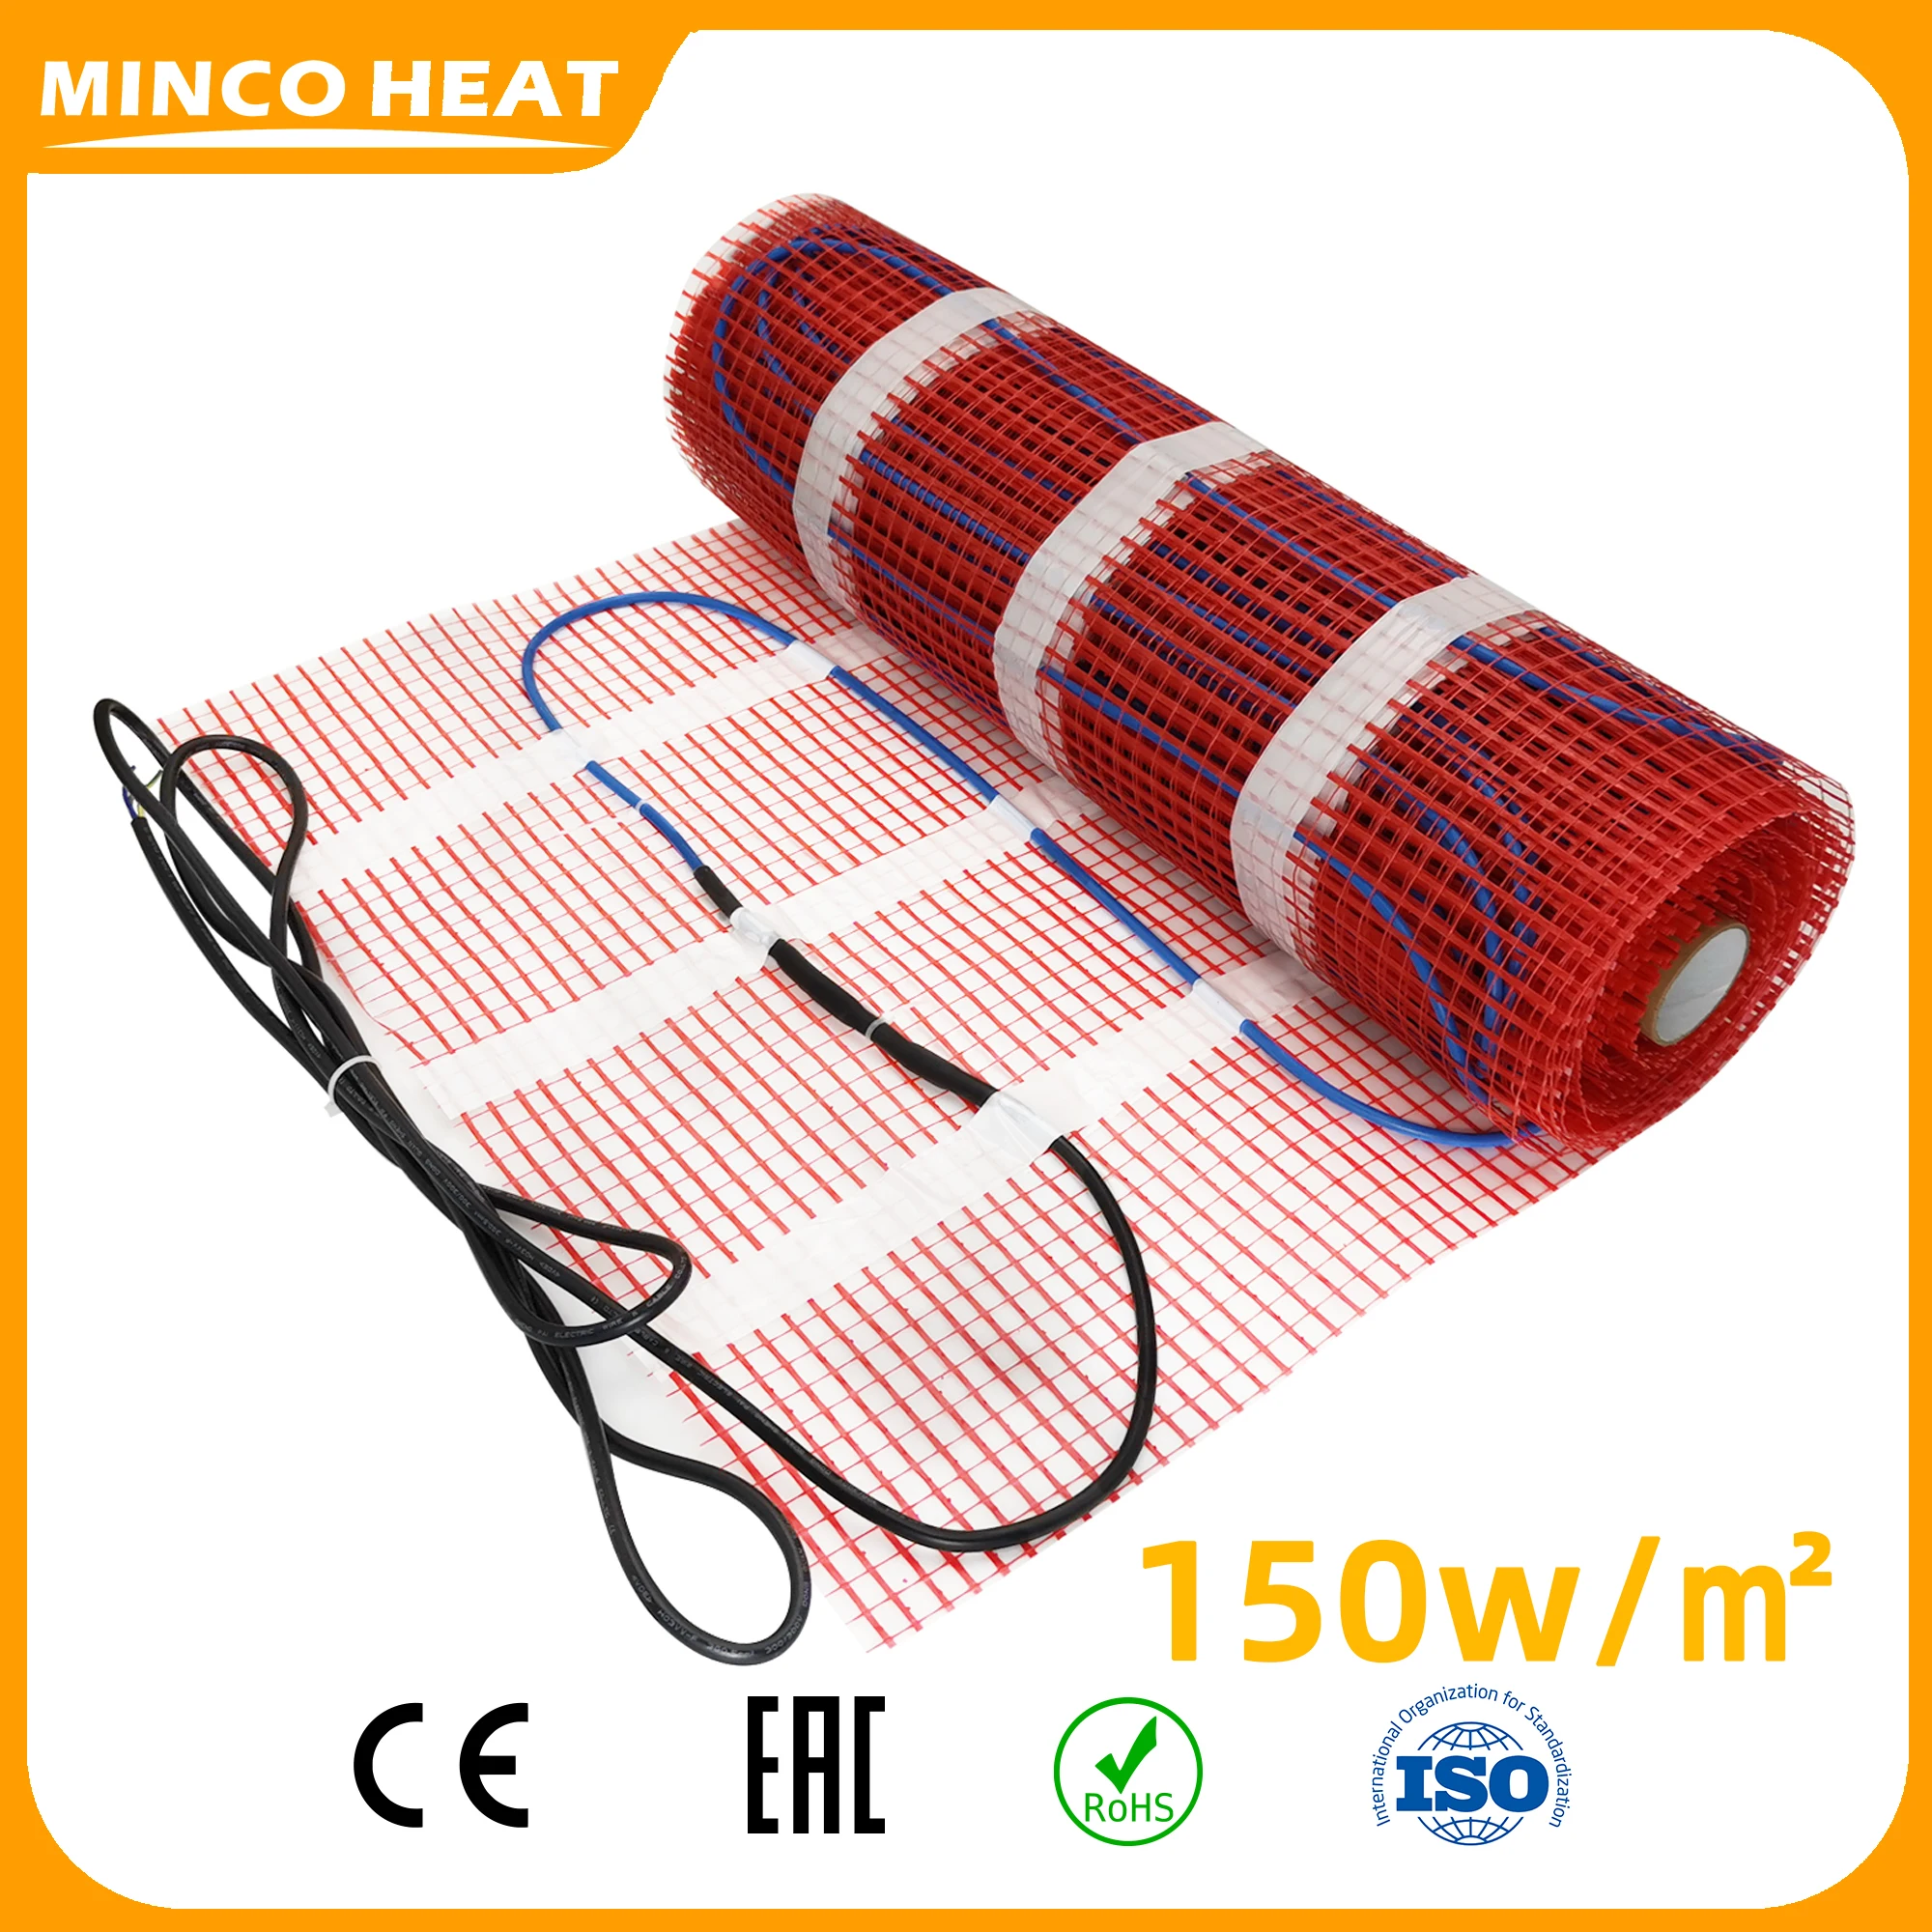 

Minco Heat 150w/㎡4.5~15㎡ Tile Cement Heating Floor Cable Electric Warm Mat Twin Conductor Electric Warm Strand Mat